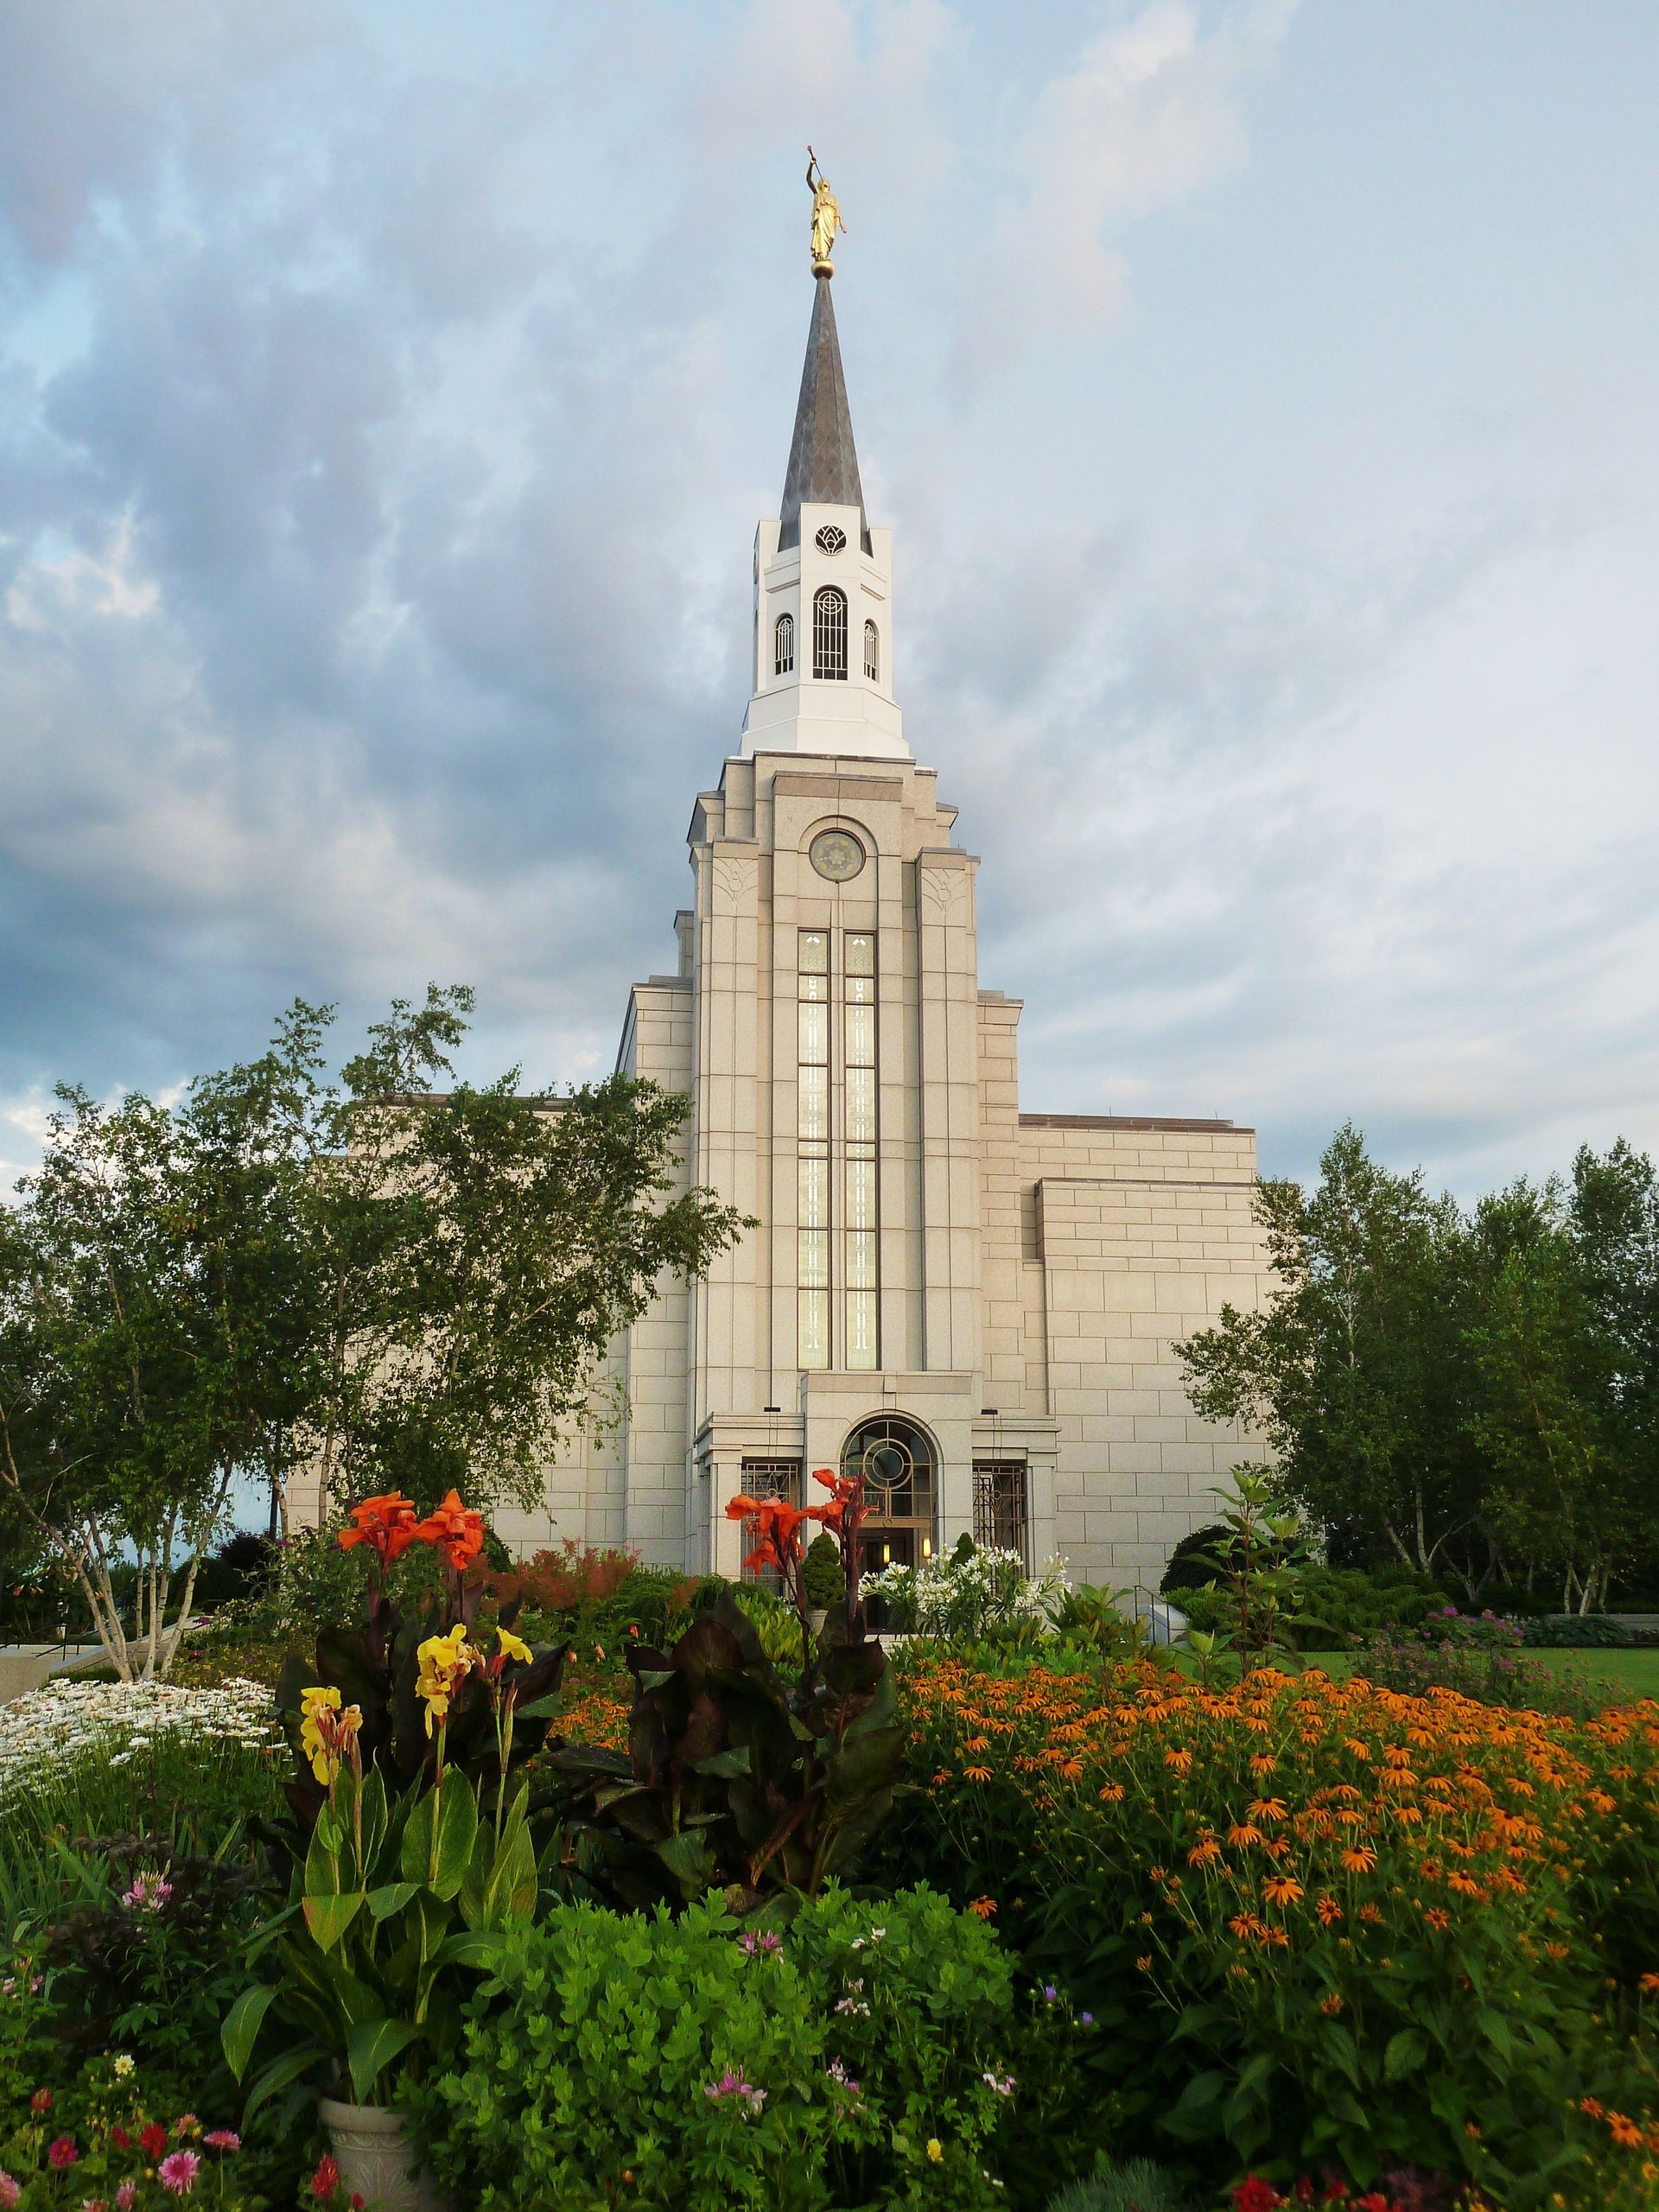 A view of the front of the Boston Massachusetts Temple from the grounds.